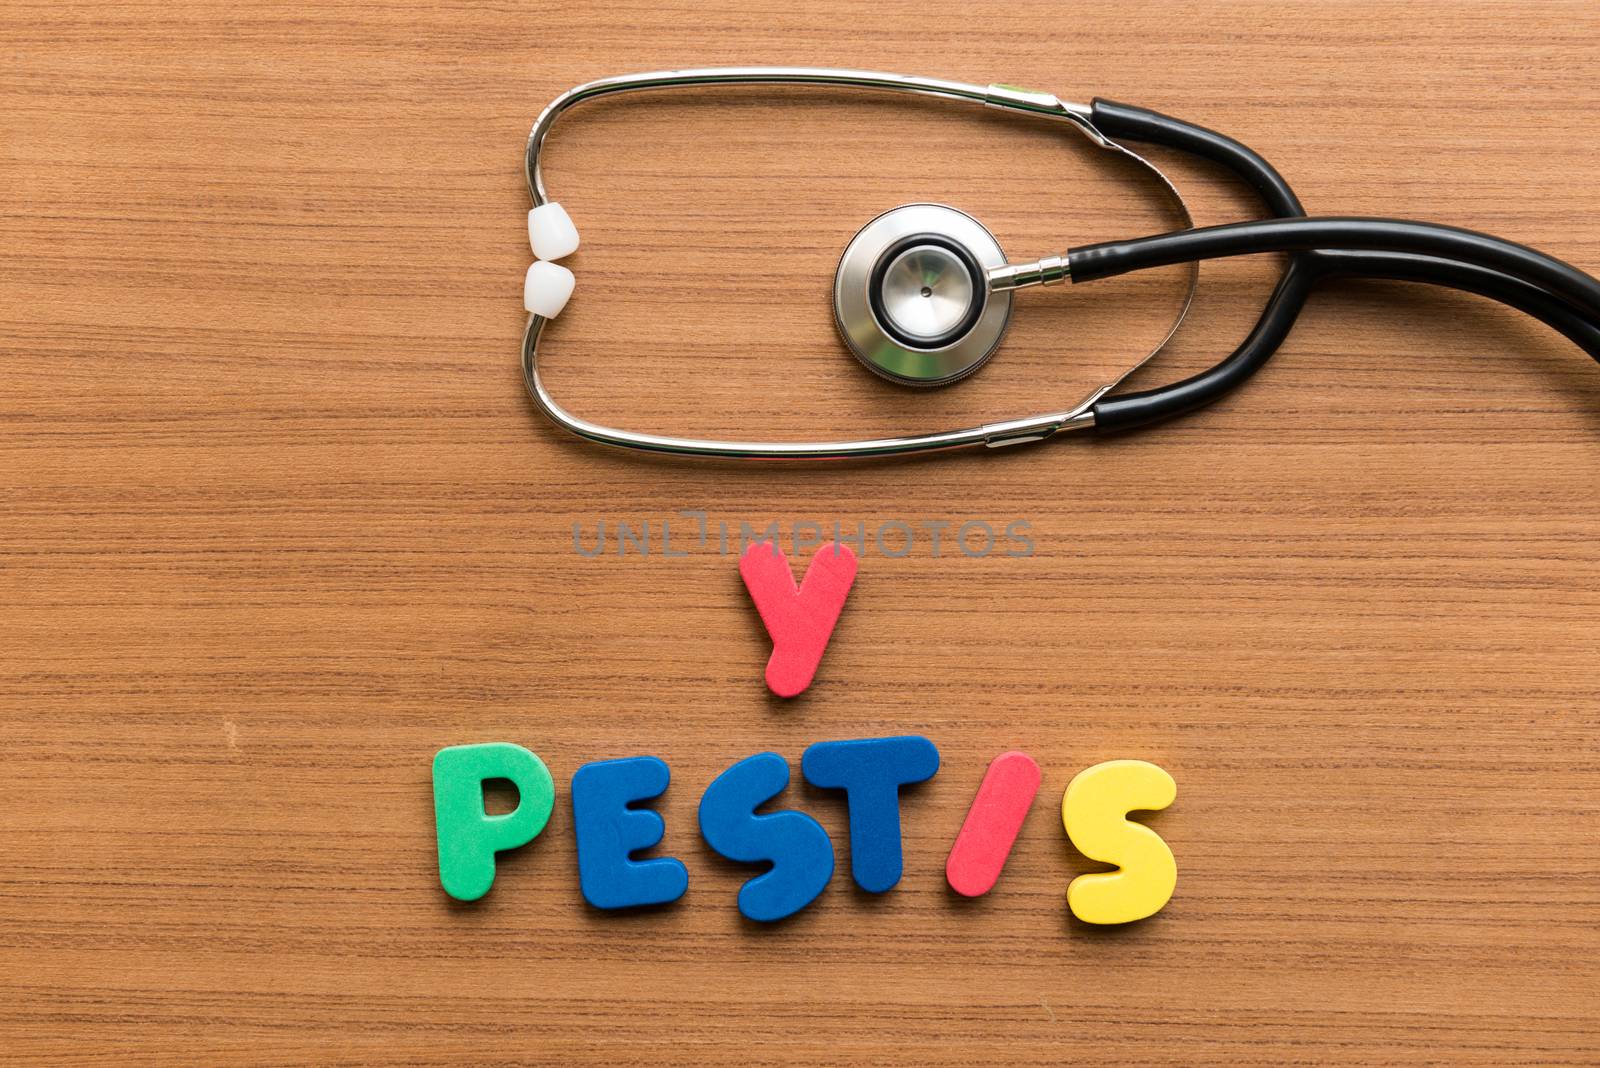 y pestis colorful word with stethoscope on wooden background